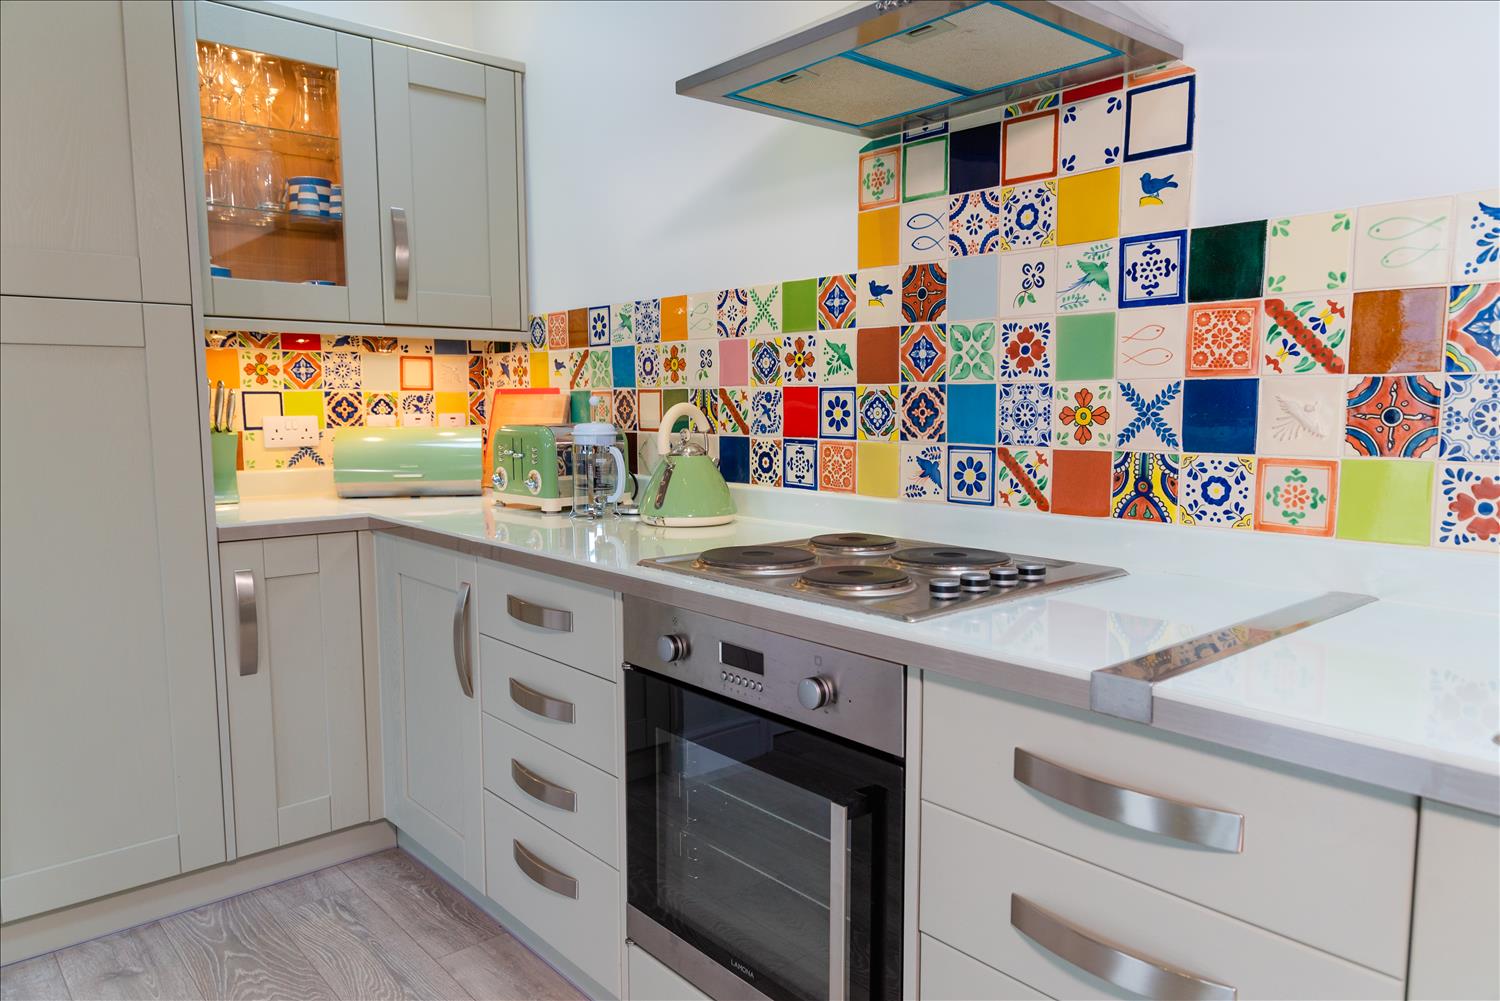 Sloe Cottage's modern fitted kitchen, with bright Mexican-style tiles attracting the eye